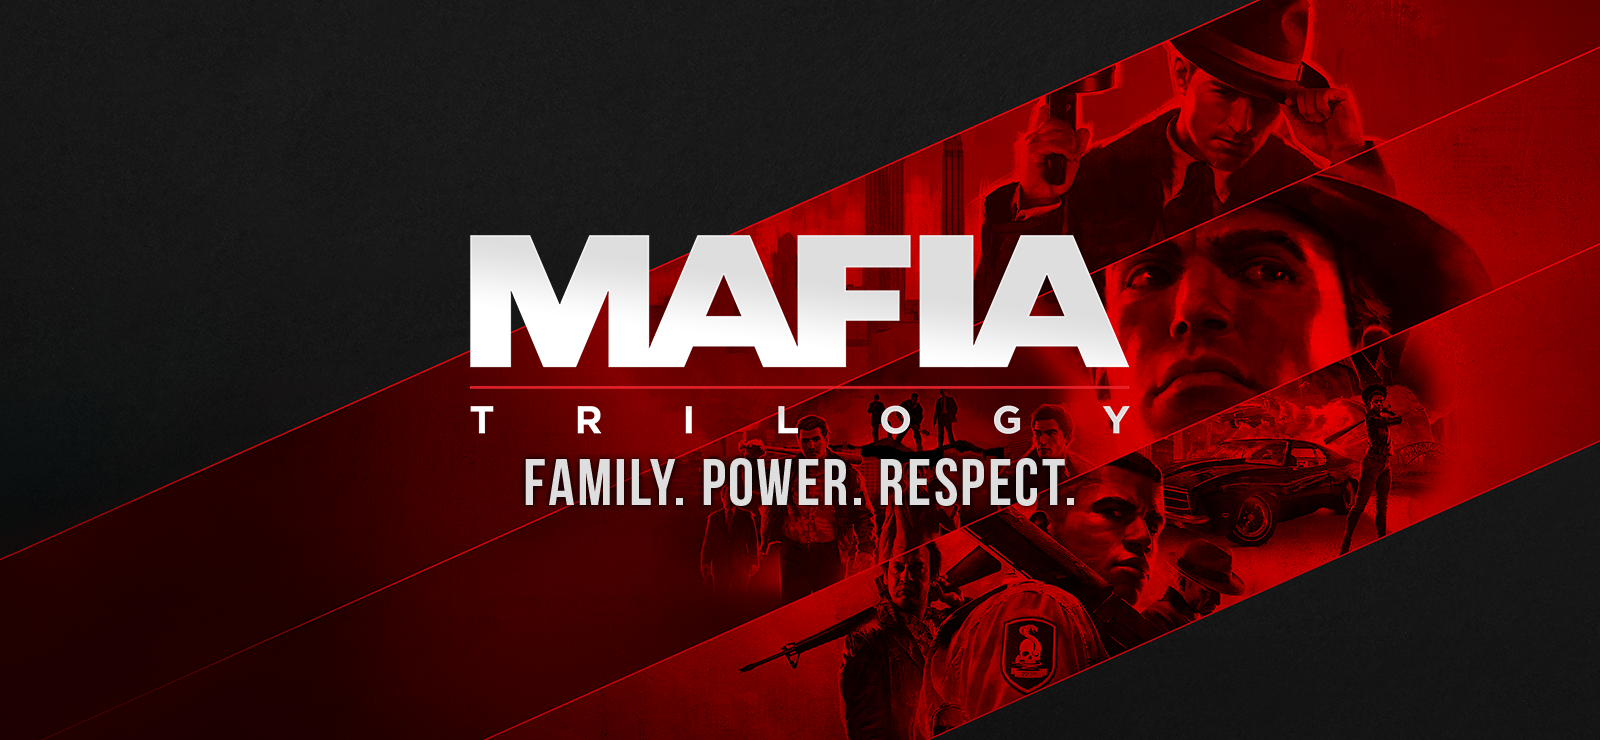 Mafia 3 Review (PS4) - A Boring & Repetitive Experience - ThisGenGaming